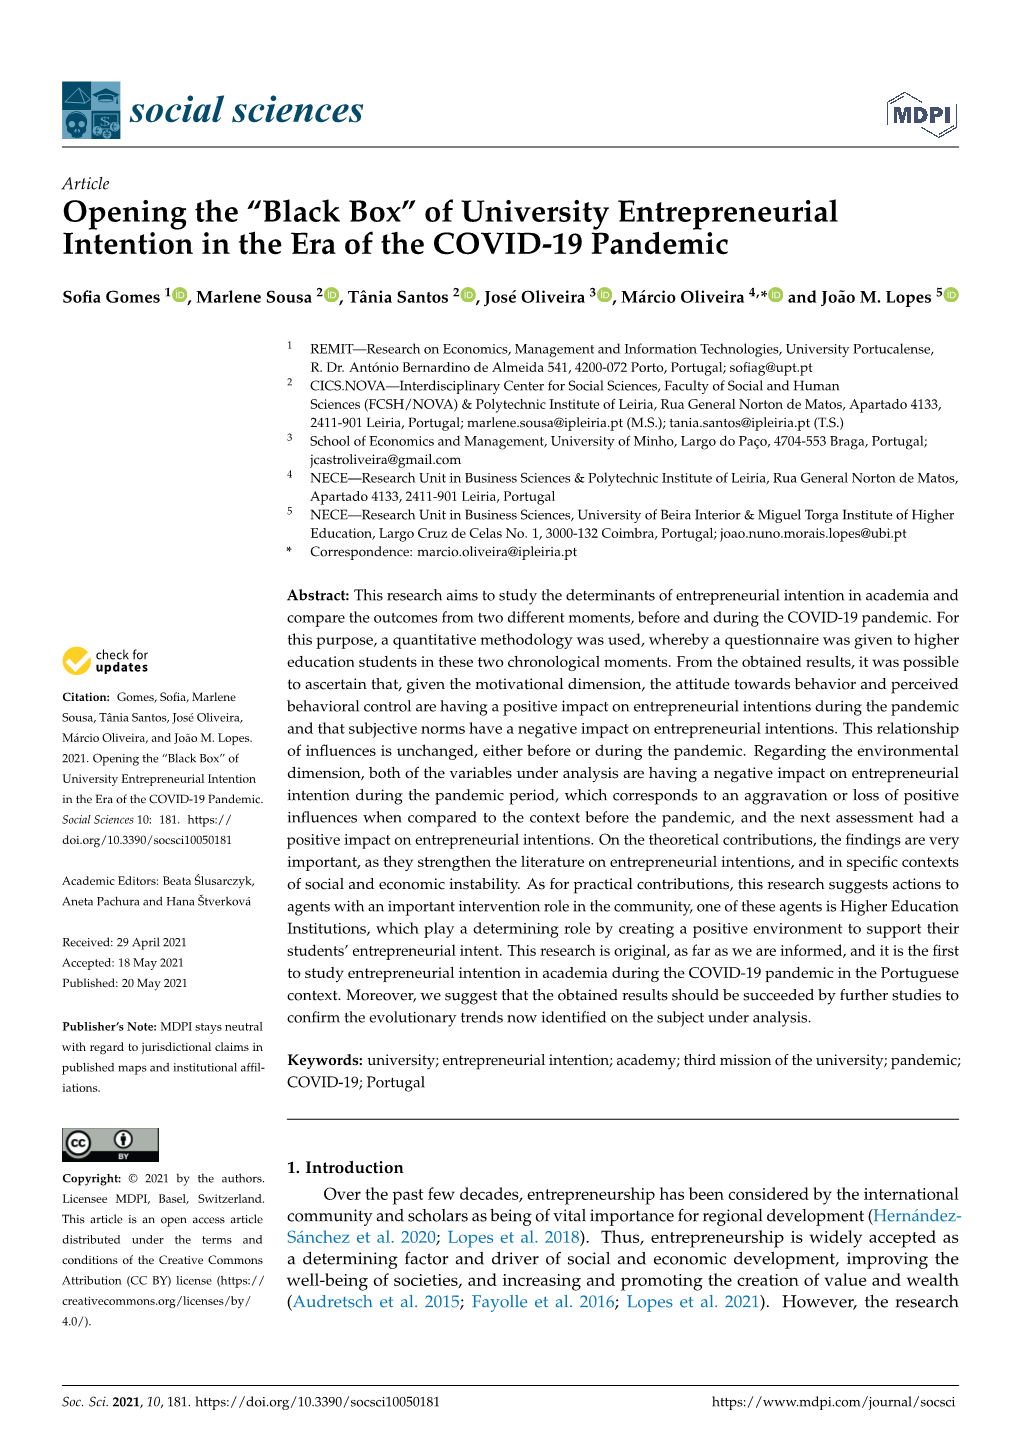 Of University Entrepreneurial Intention in the Era of the COVID-19 Pandemic